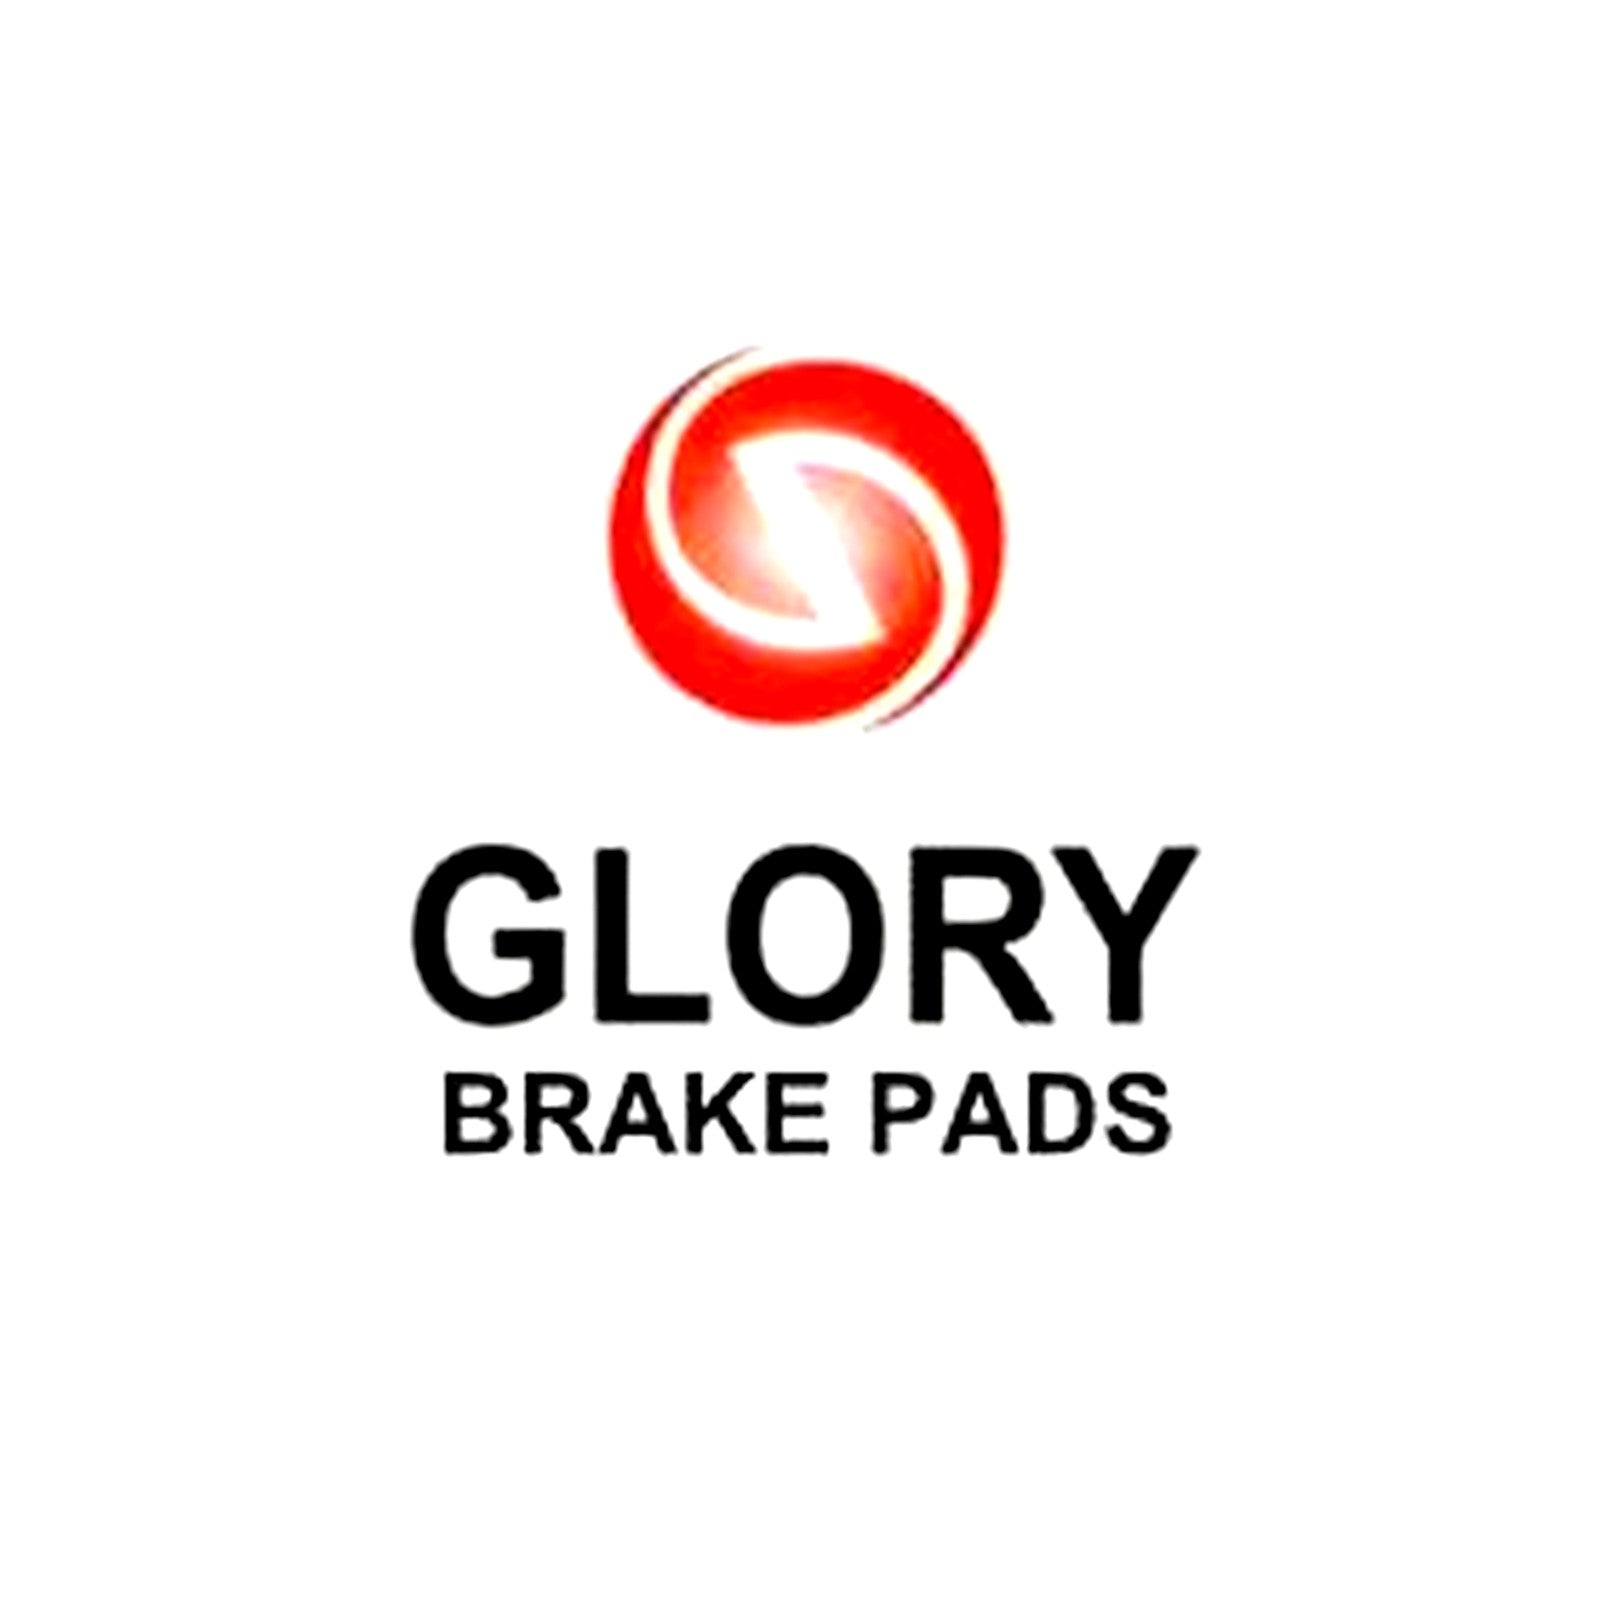 BRAKE, DISC PAD FRONT & REAR FOR TOYOTA GRANDE (GLORY BRAKES)